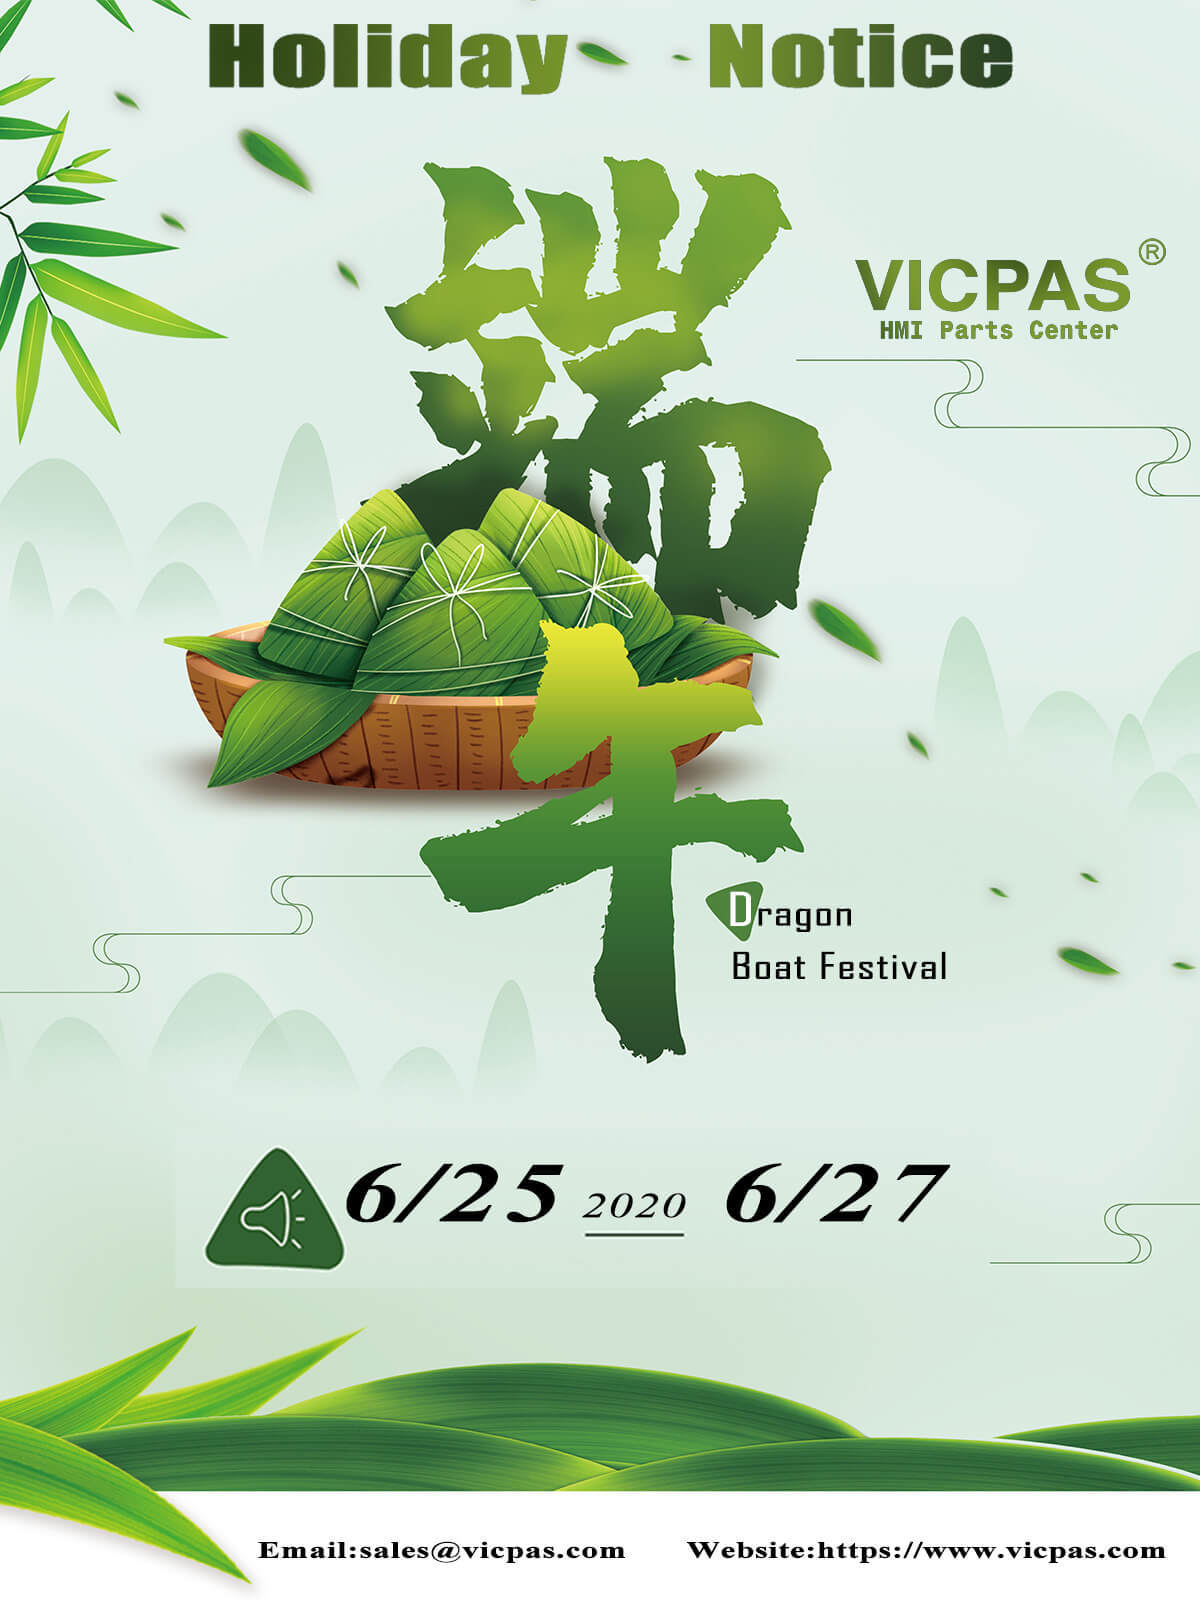 The Dragon Boat Festival Holiday Notice